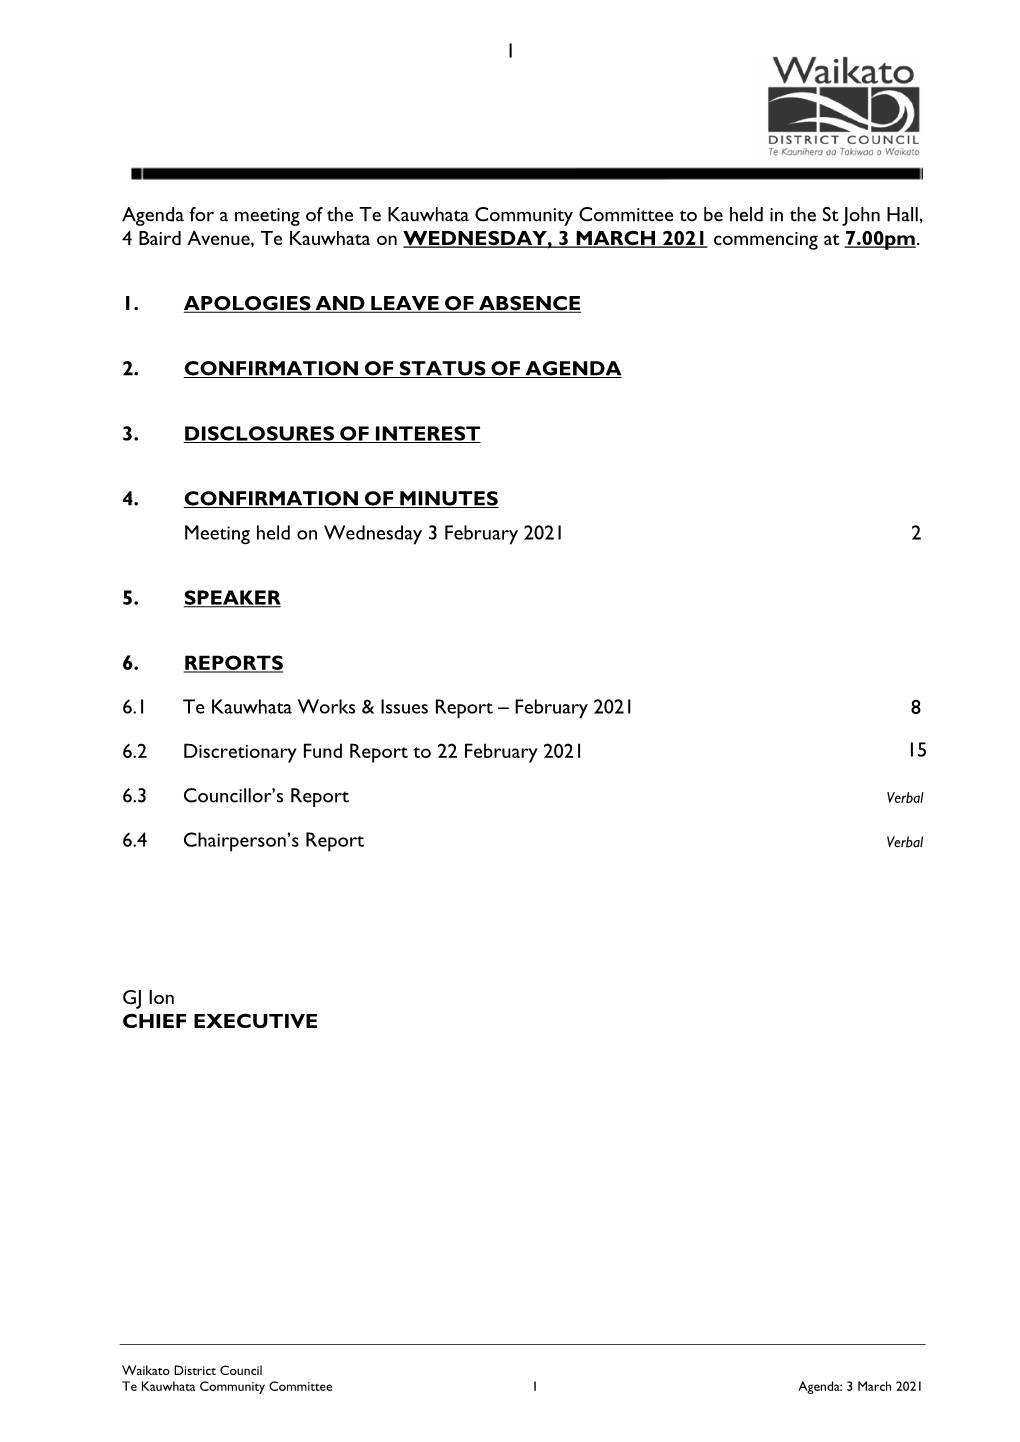 Agenda for a Meeting of the Te Kauwhata Community Committee To